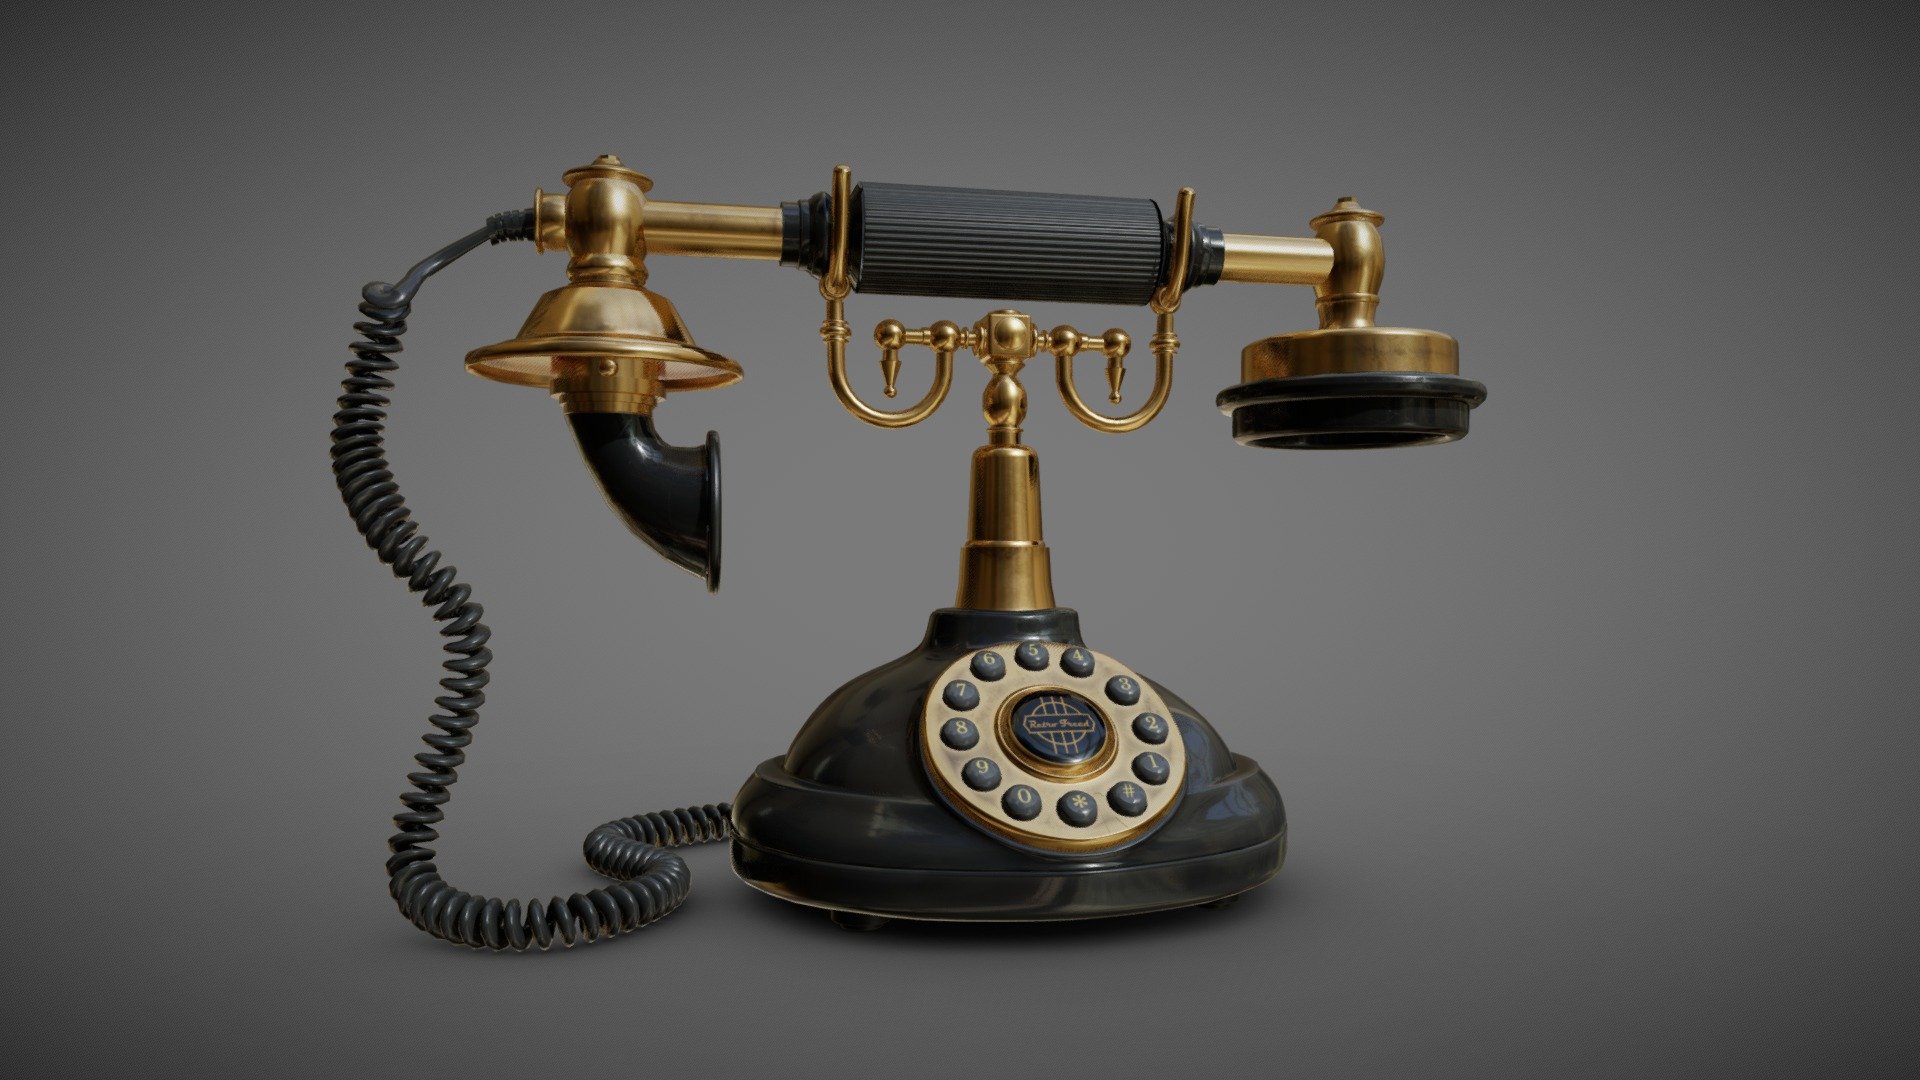 Vintage telephone based on the Toscano PM1920!

Modeled in Maya and textured with Substance Painter

Free to download and use as you wish :)
 - Vintage telephone (Toscano PM1920) - Download Free 3D model by Fredrik Johansen (@kird3rf) 3d model